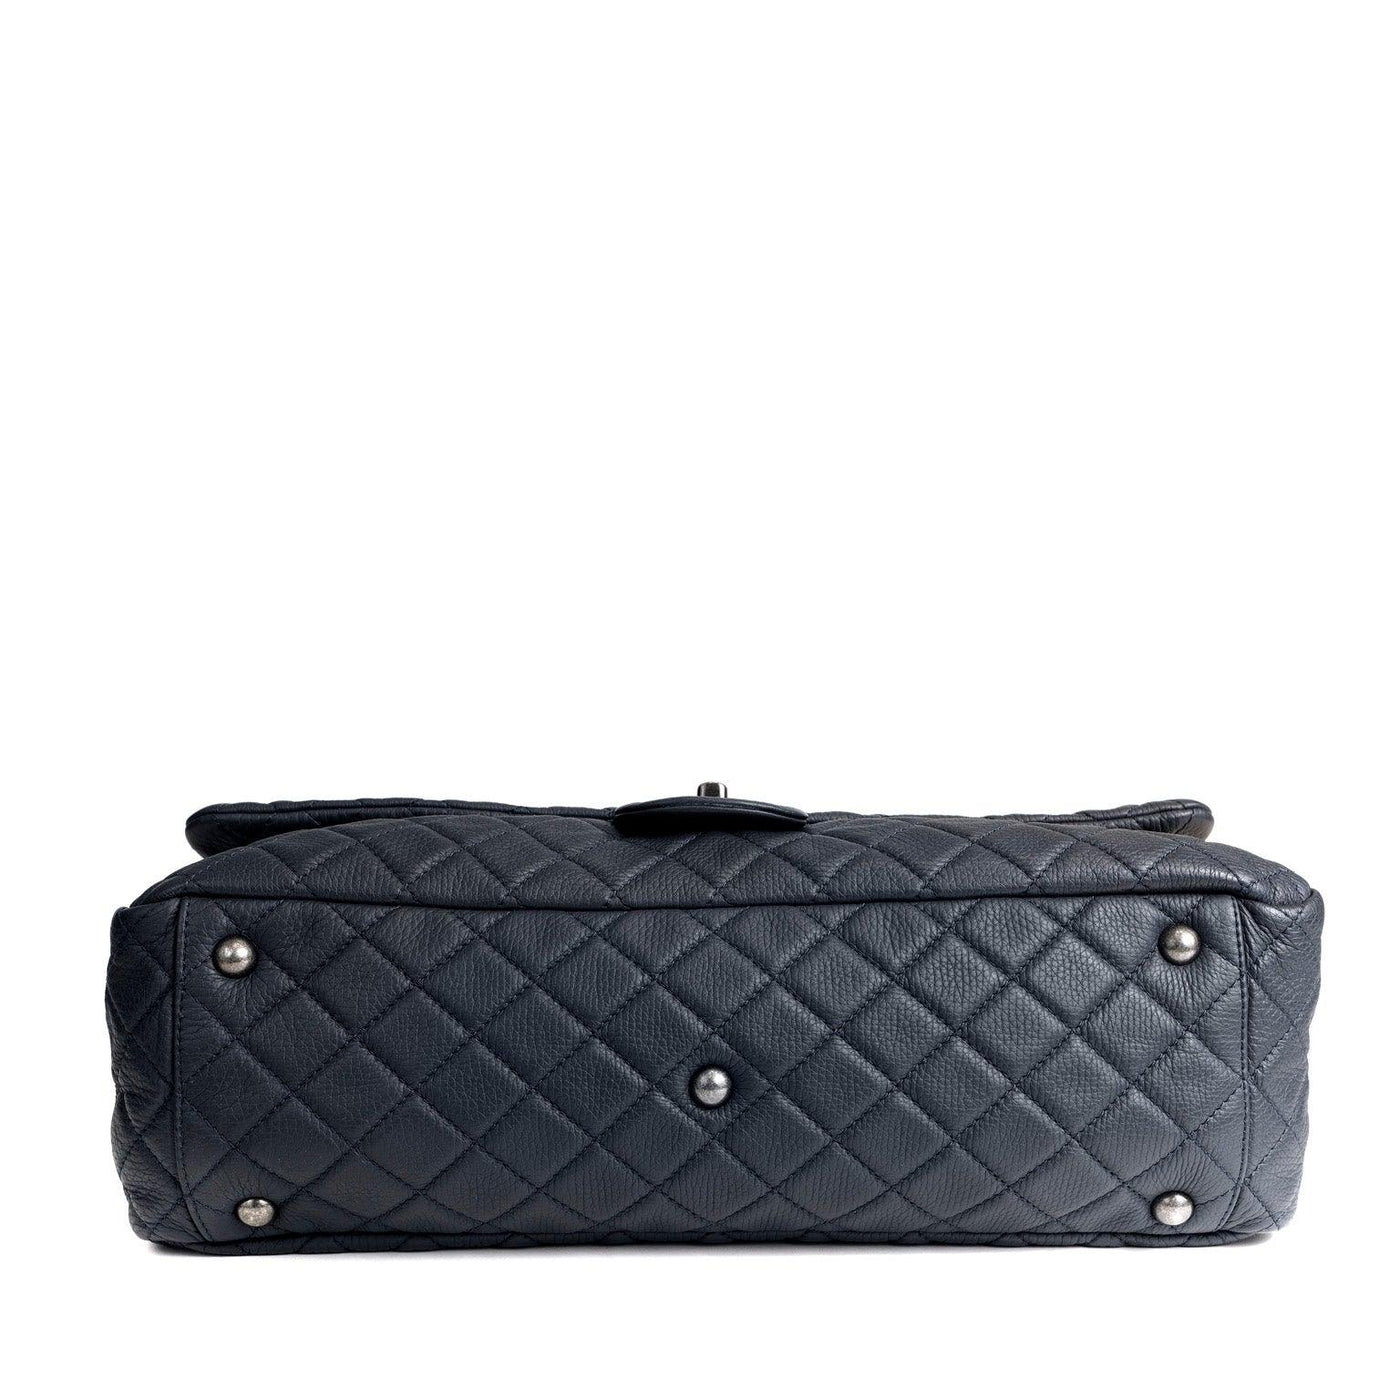 Get your hands on the stunning CHANEL NAVY XXL TRAVEL CLASSIC FLAP BAG,  made from top-quality navy lambskin leather – Only Authentics